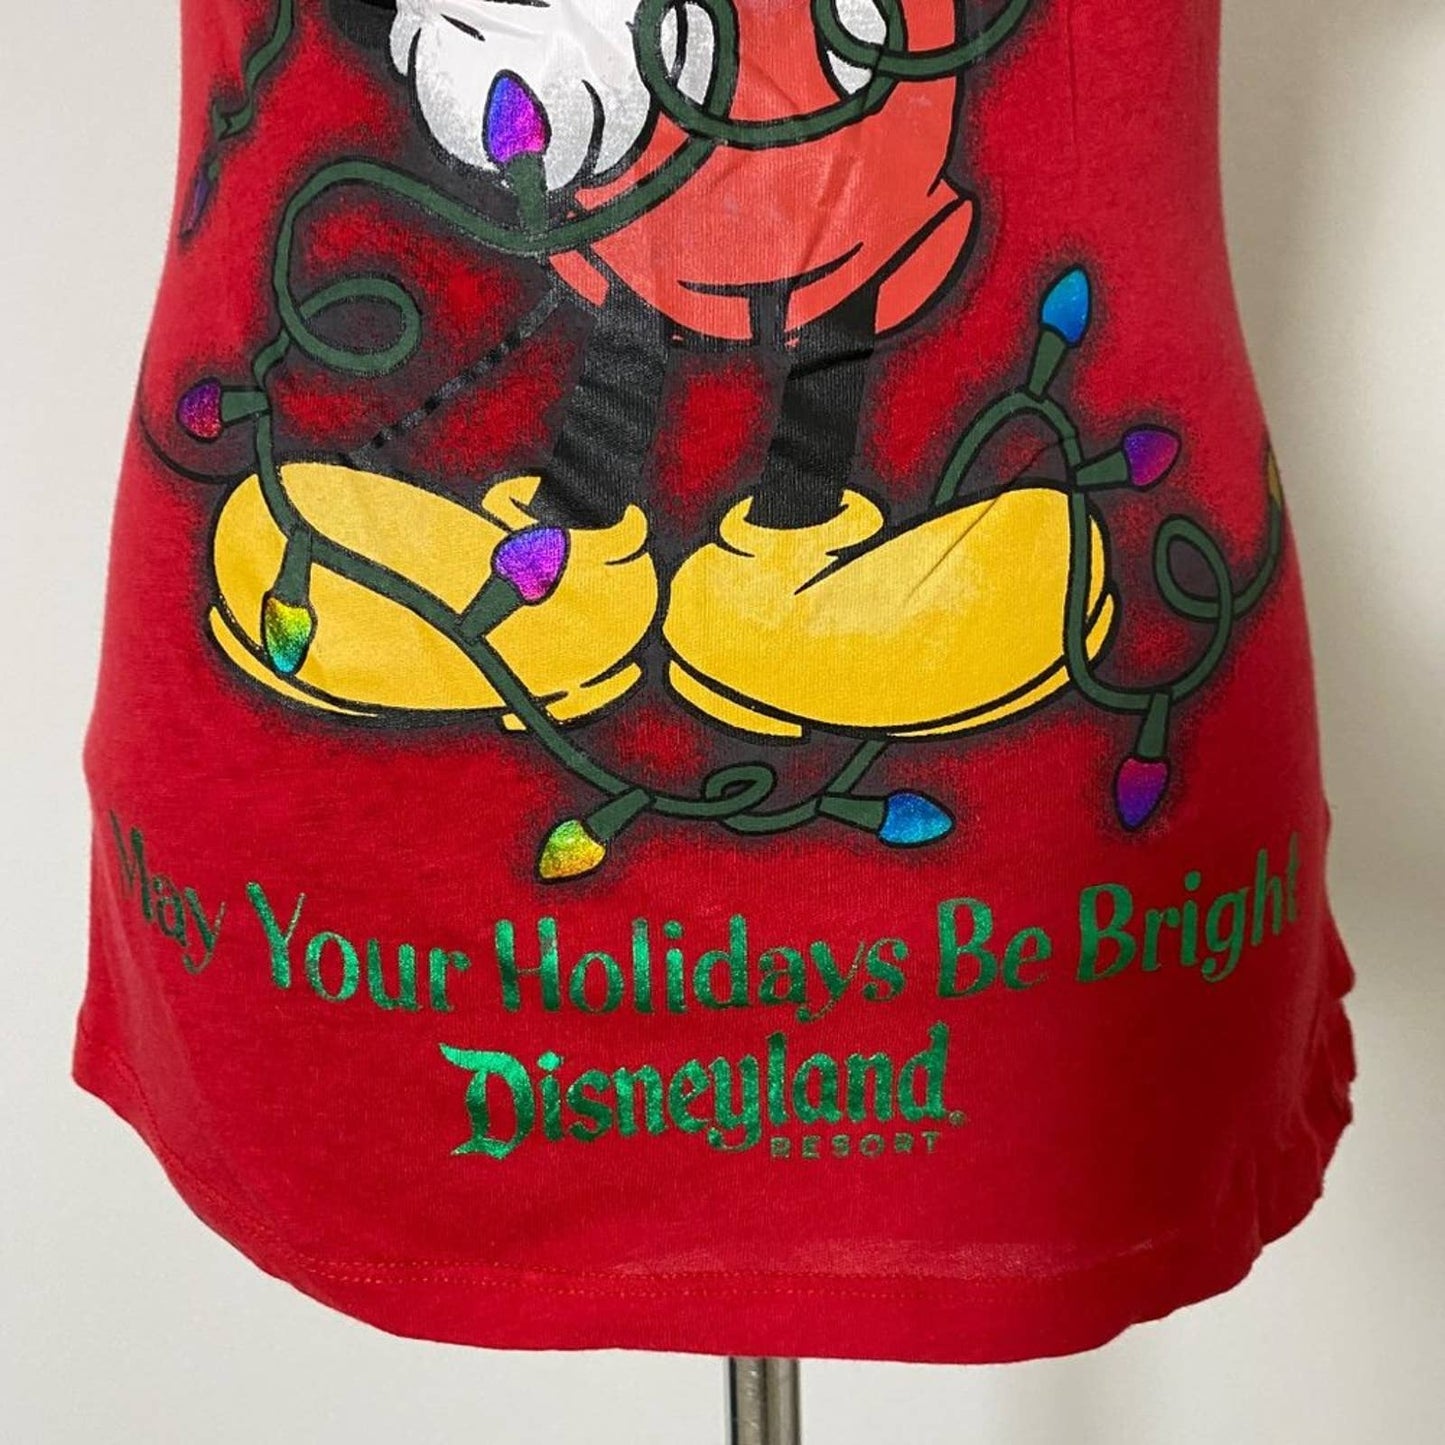 Disney Parks sz S Mickey Mouse red 100% Cotton T Shirt